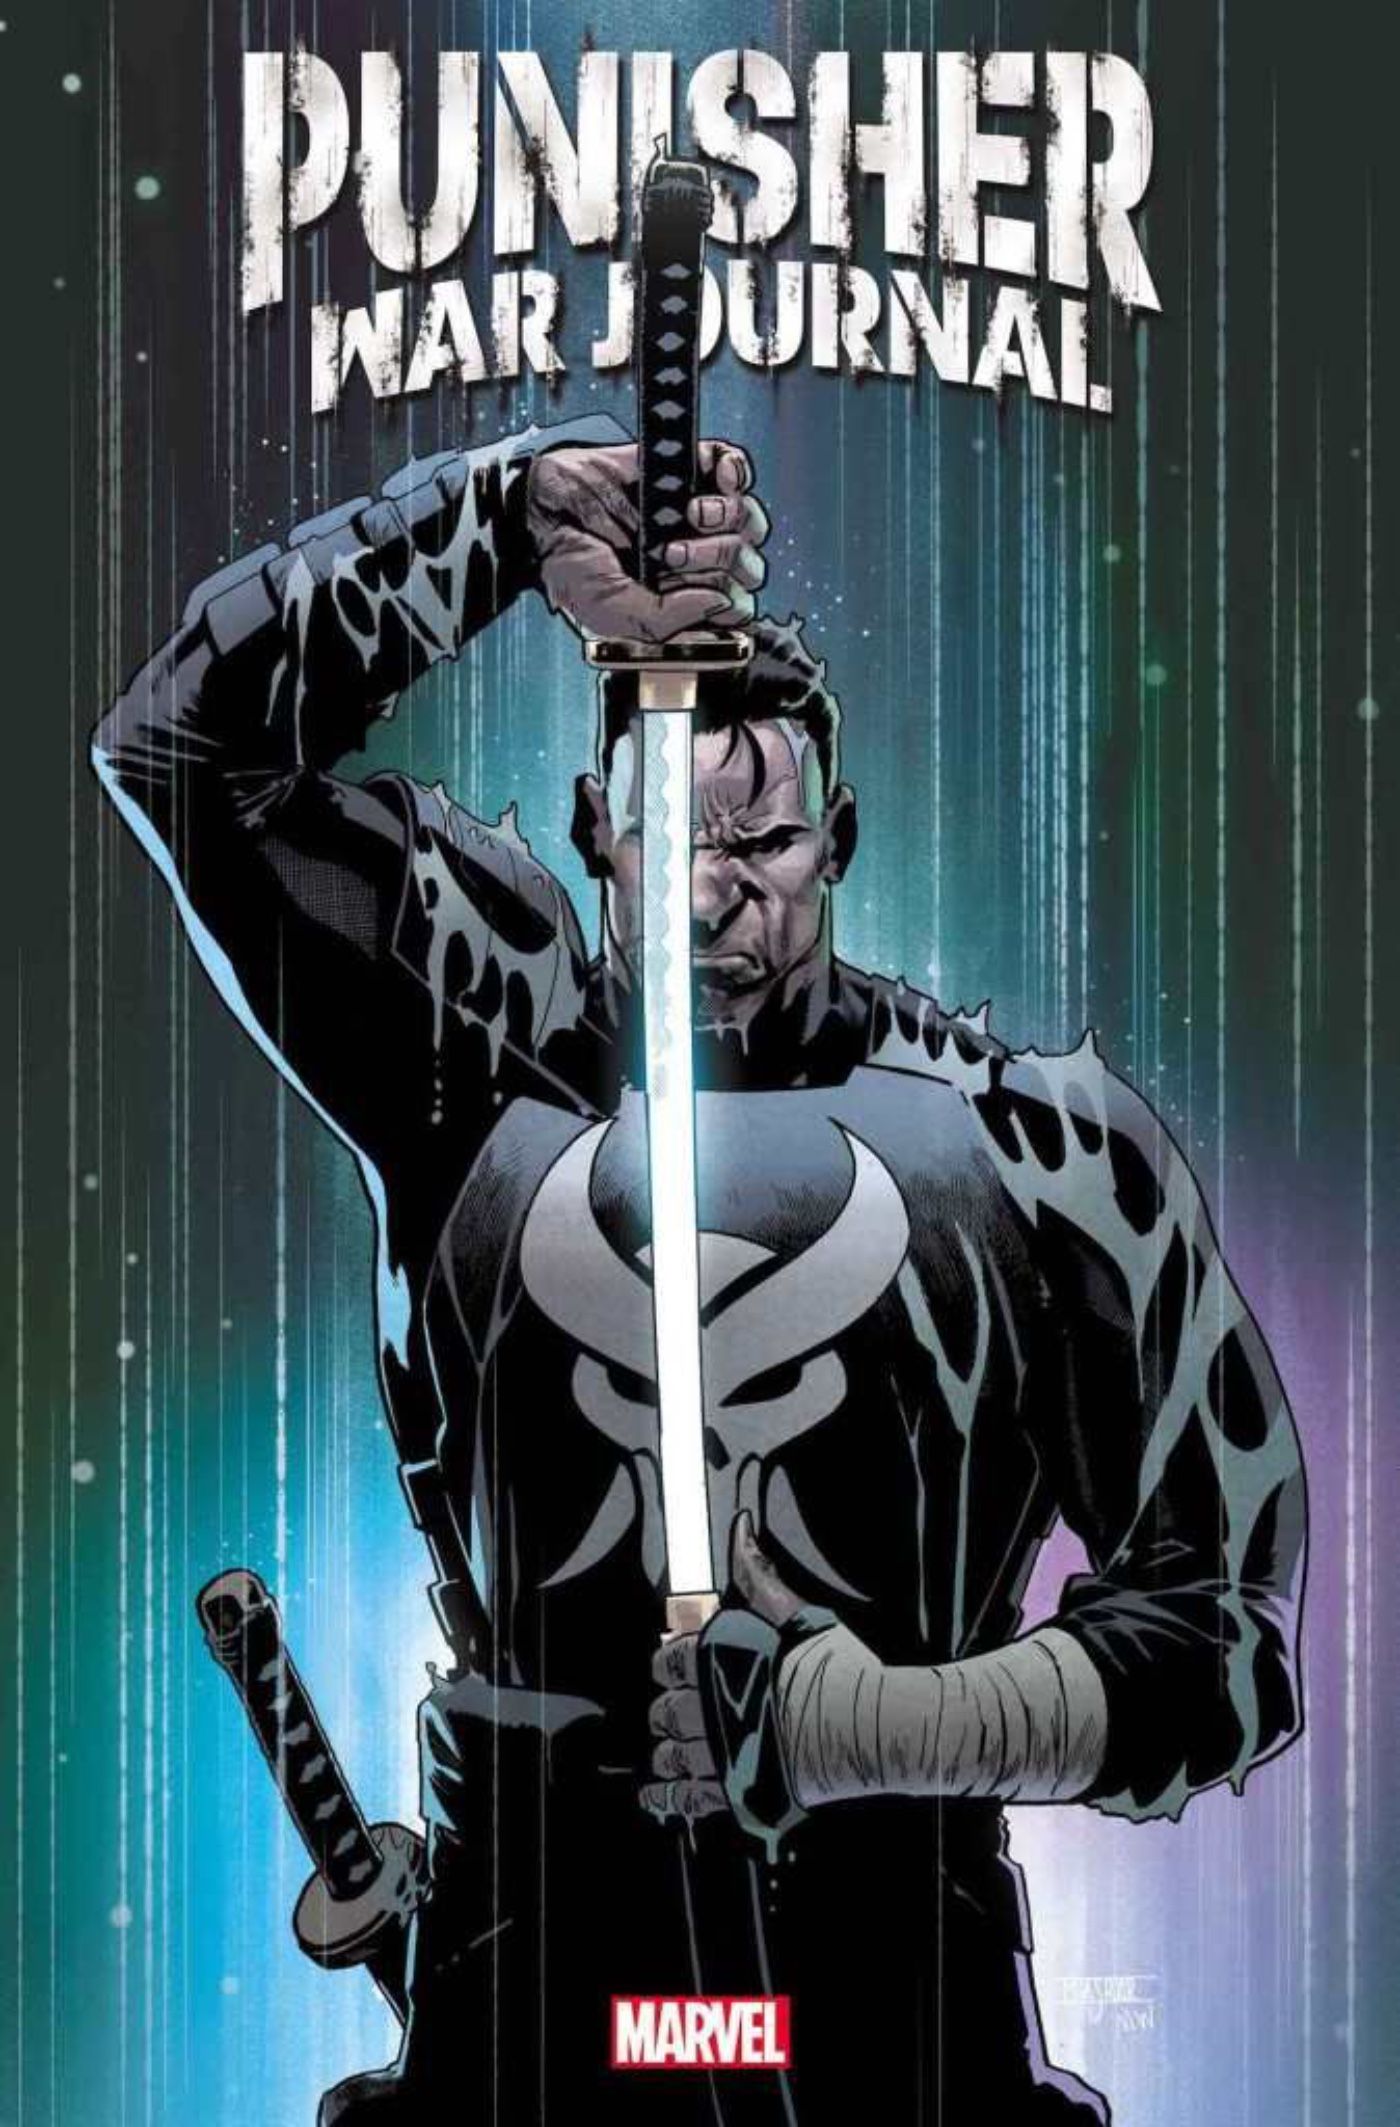 Punisher War Journal cover, showing Punisher holding a sword in the rain